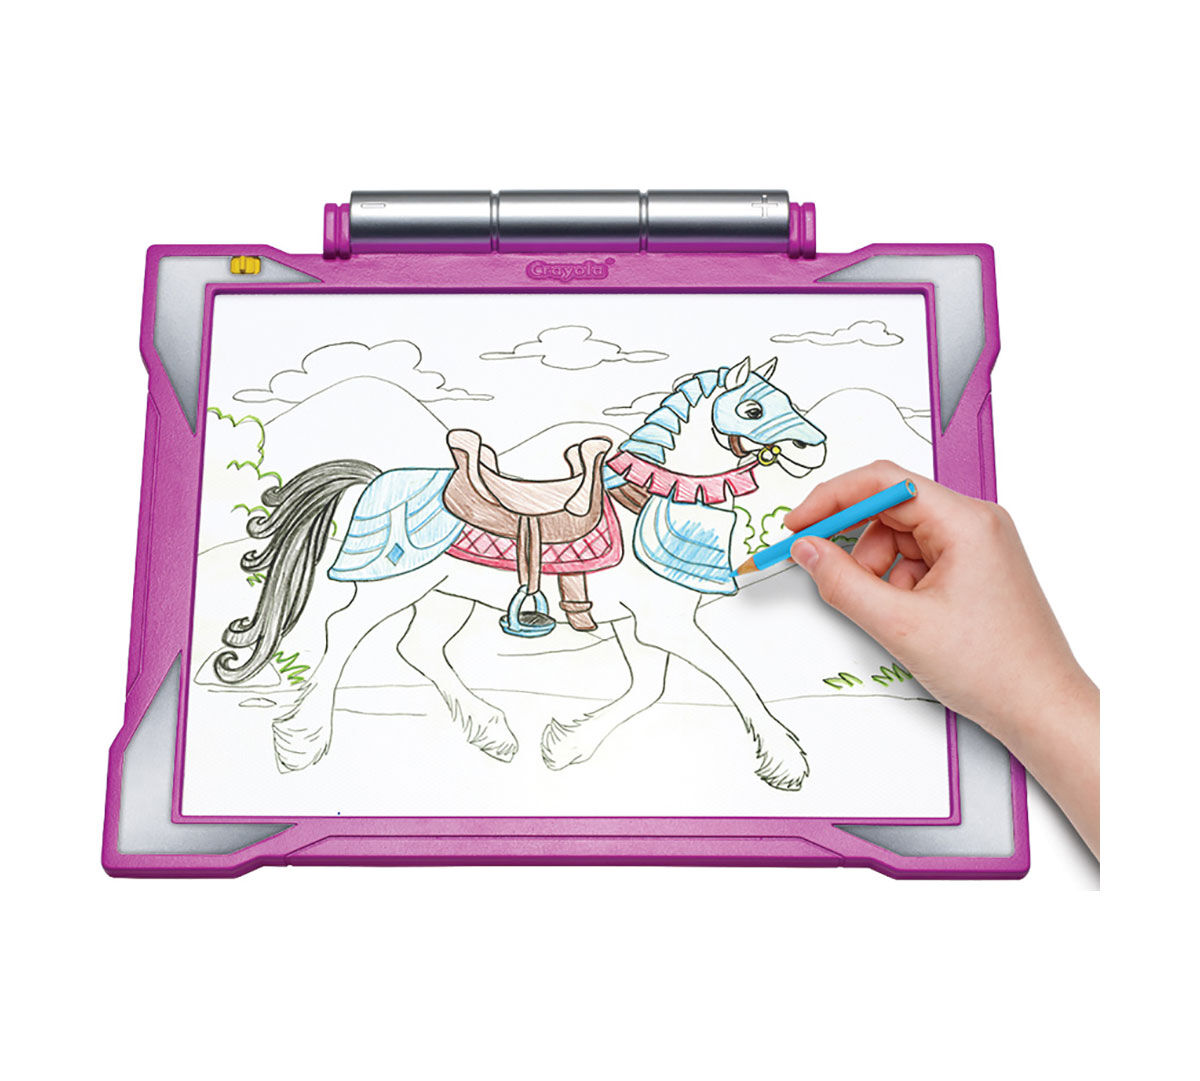 Coloring Board for Kids Crayola Light-up Tracing Pad Pink Toys for Girls Gift 